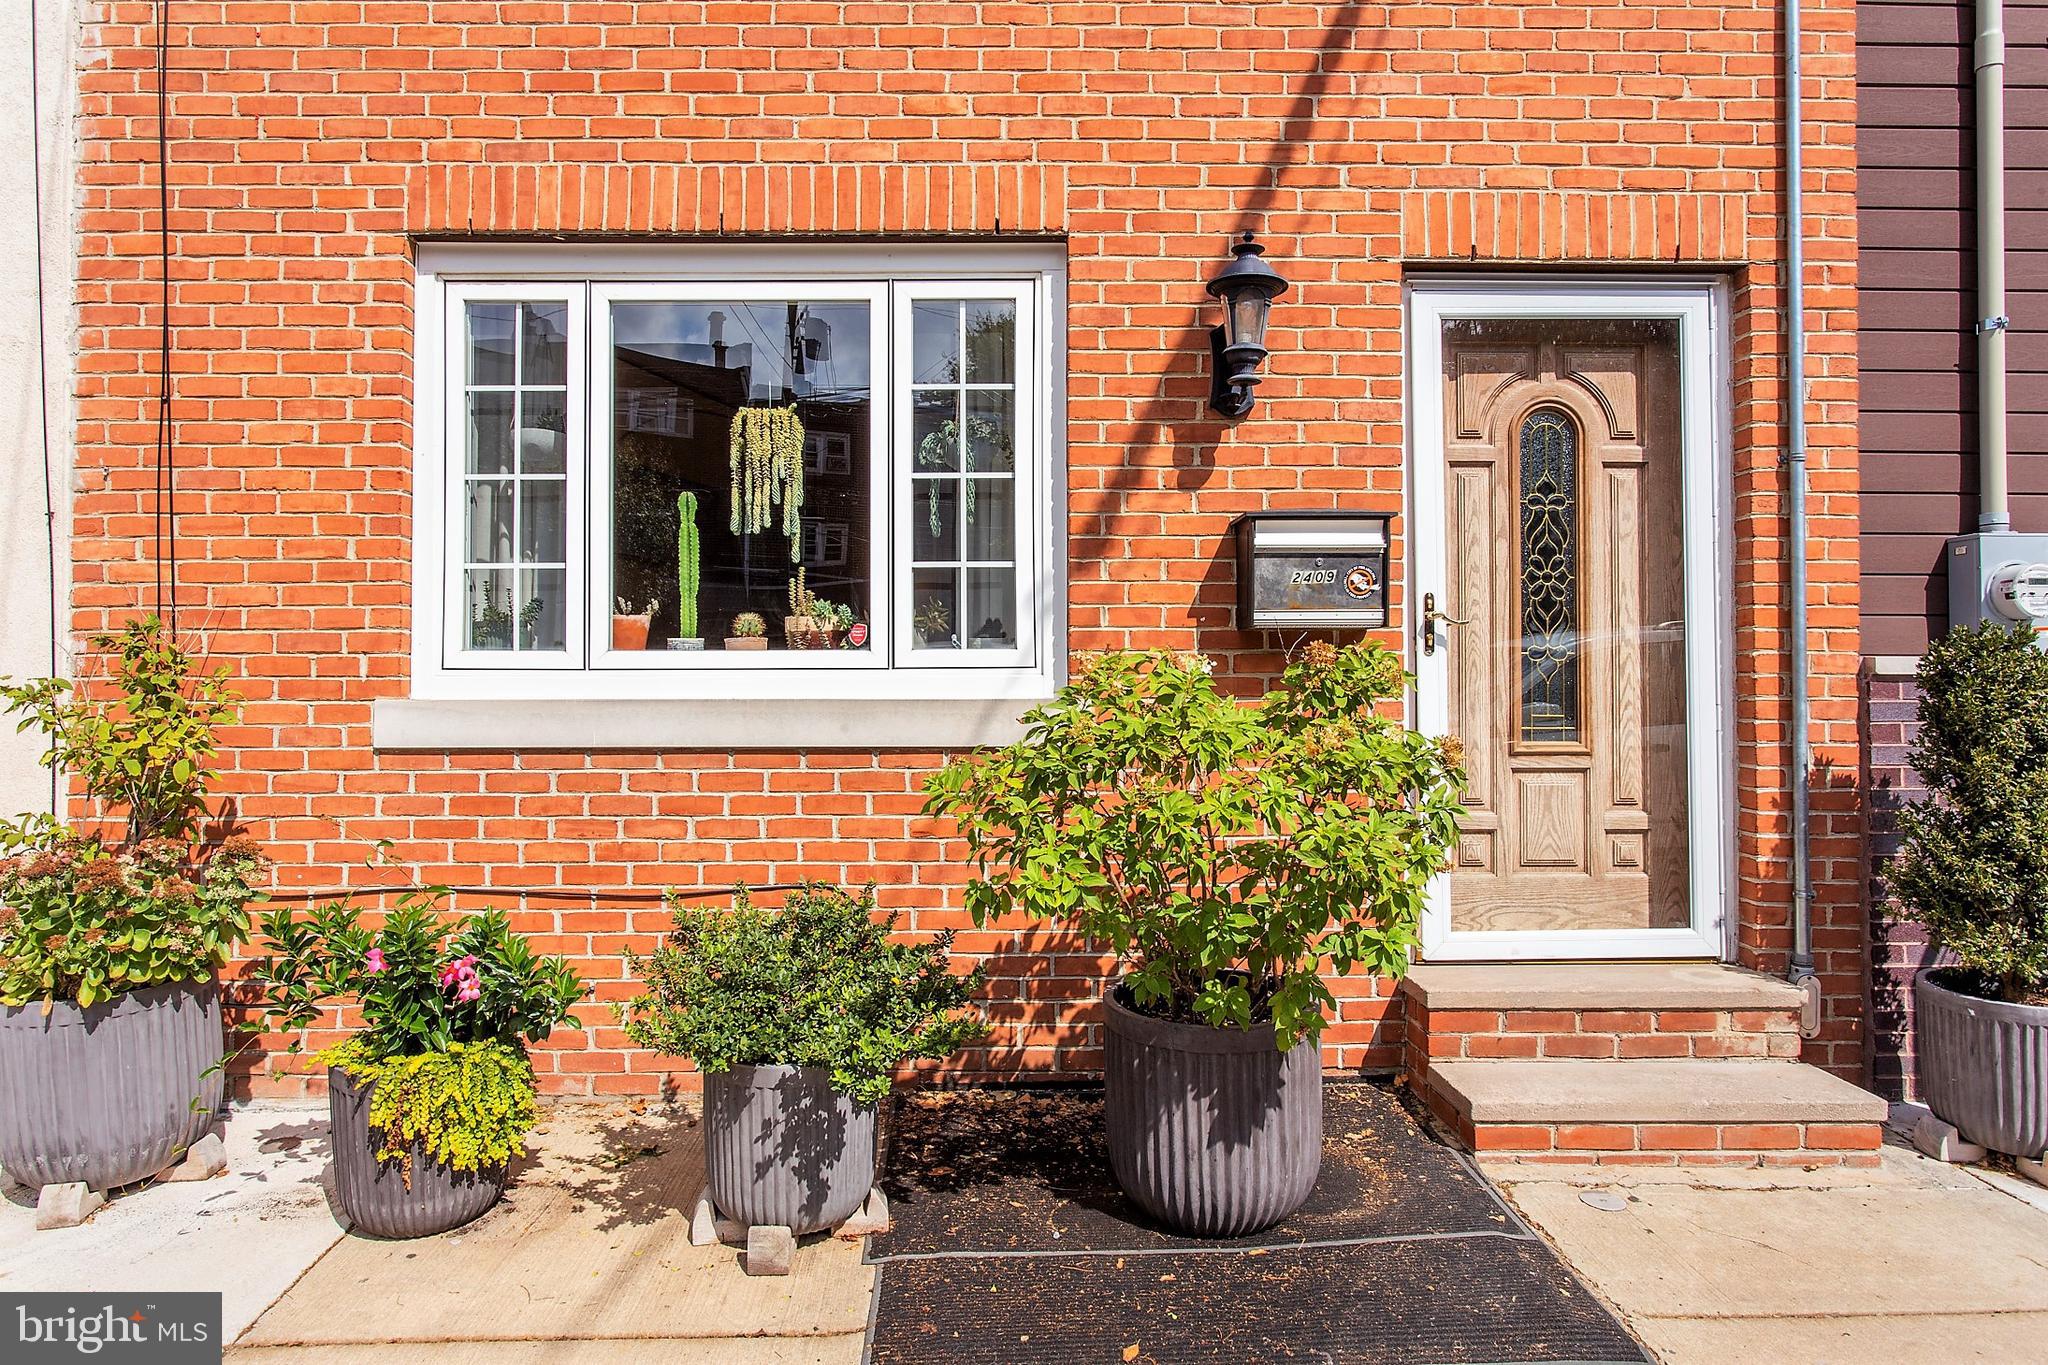 a view of a brick house with potted plants